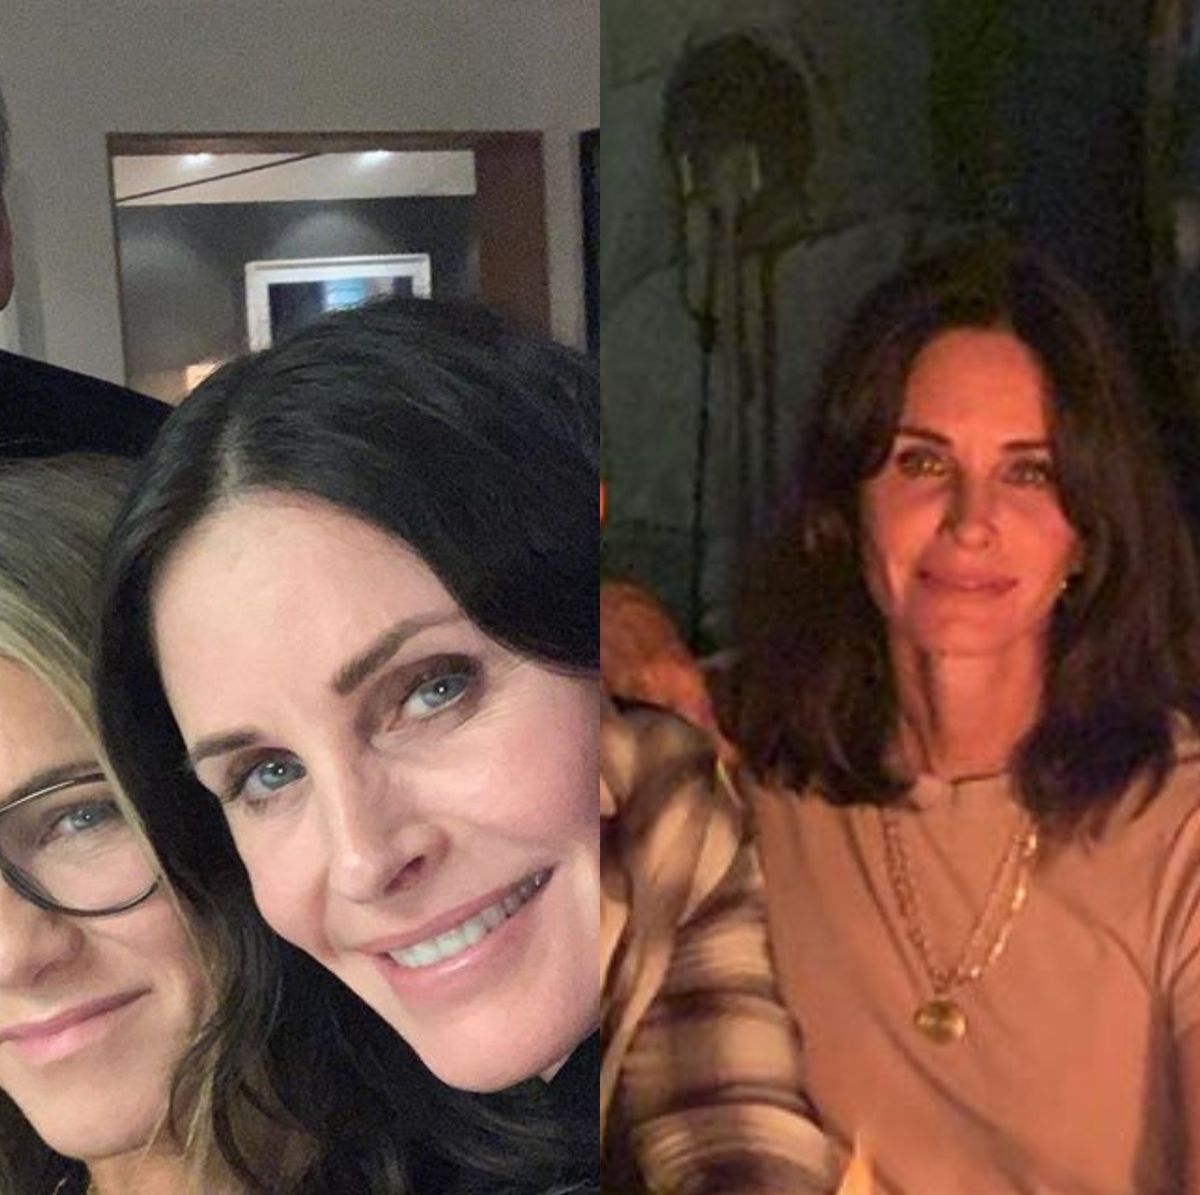 The Cast Of Friends Had Dinner Together At Courteney Cox's House